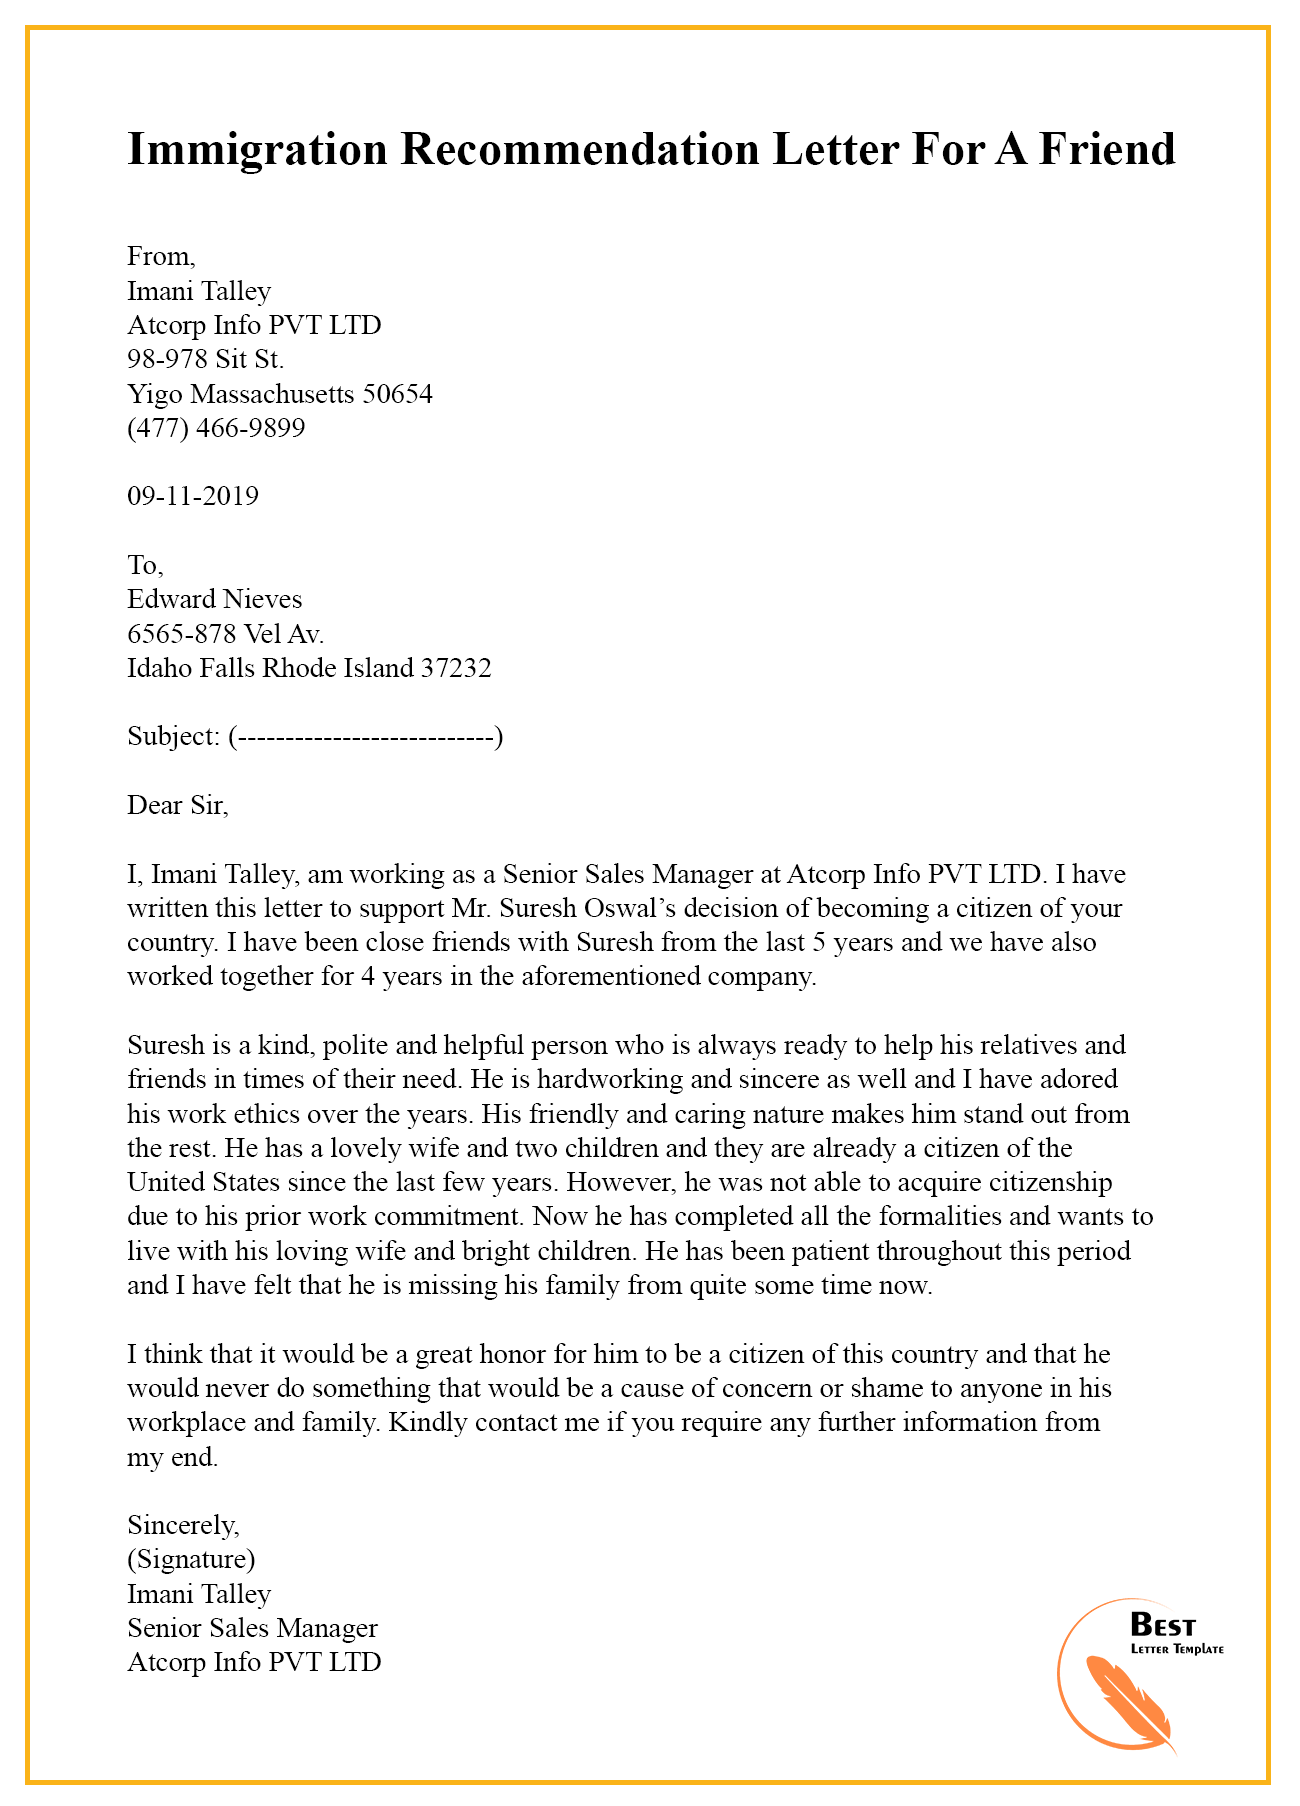 Reference Letter From Friend from bestlettertemplate.com